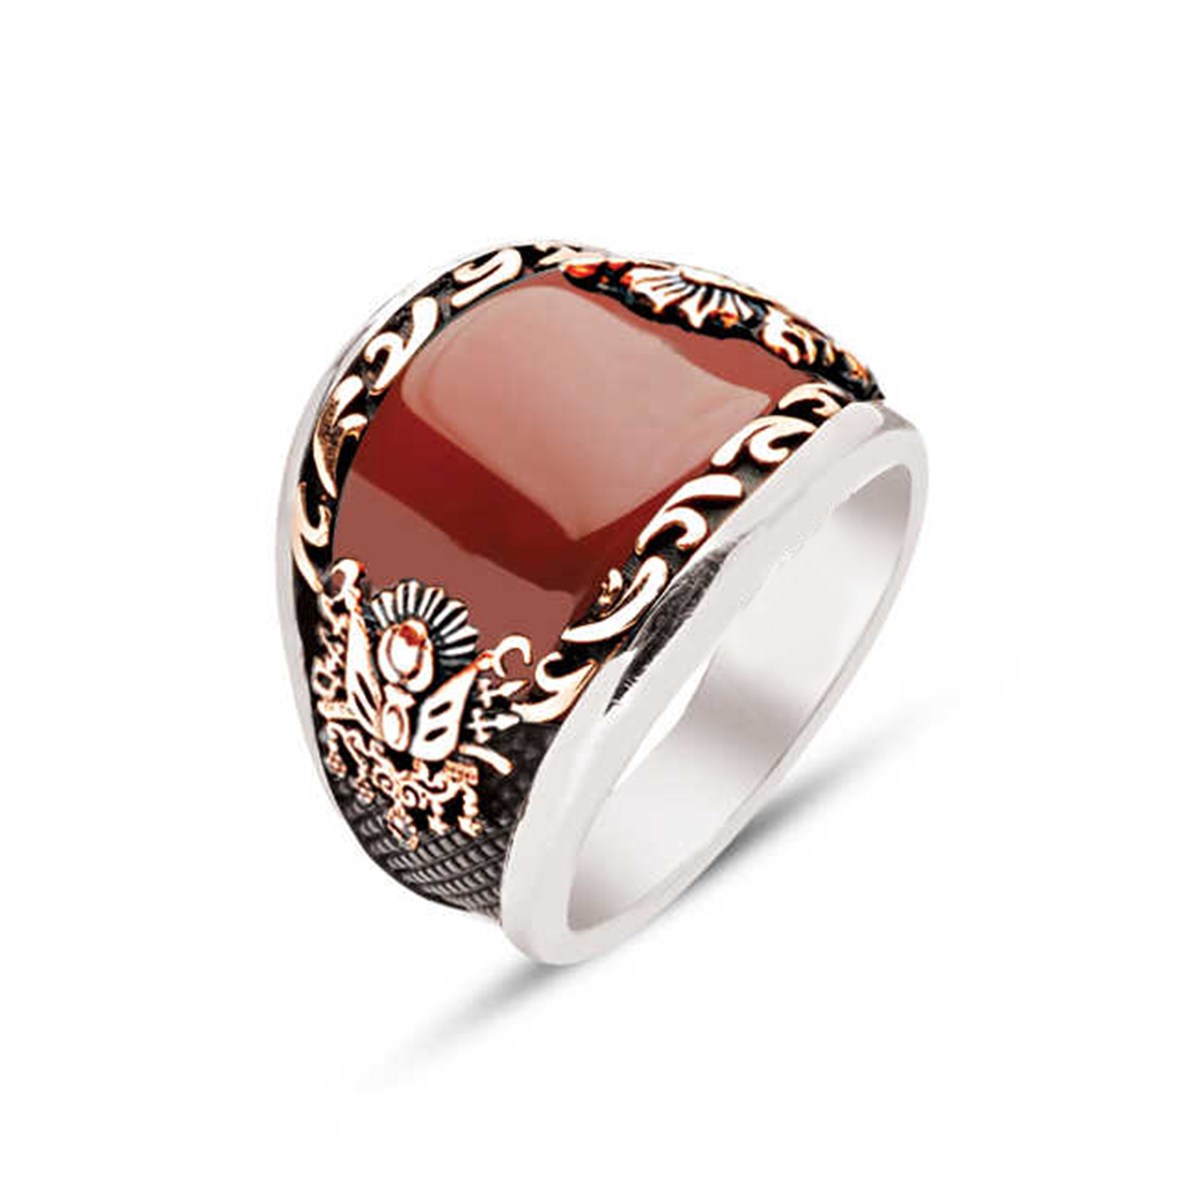 Silver Special Cut Agate Stone Tugra Men's Ring